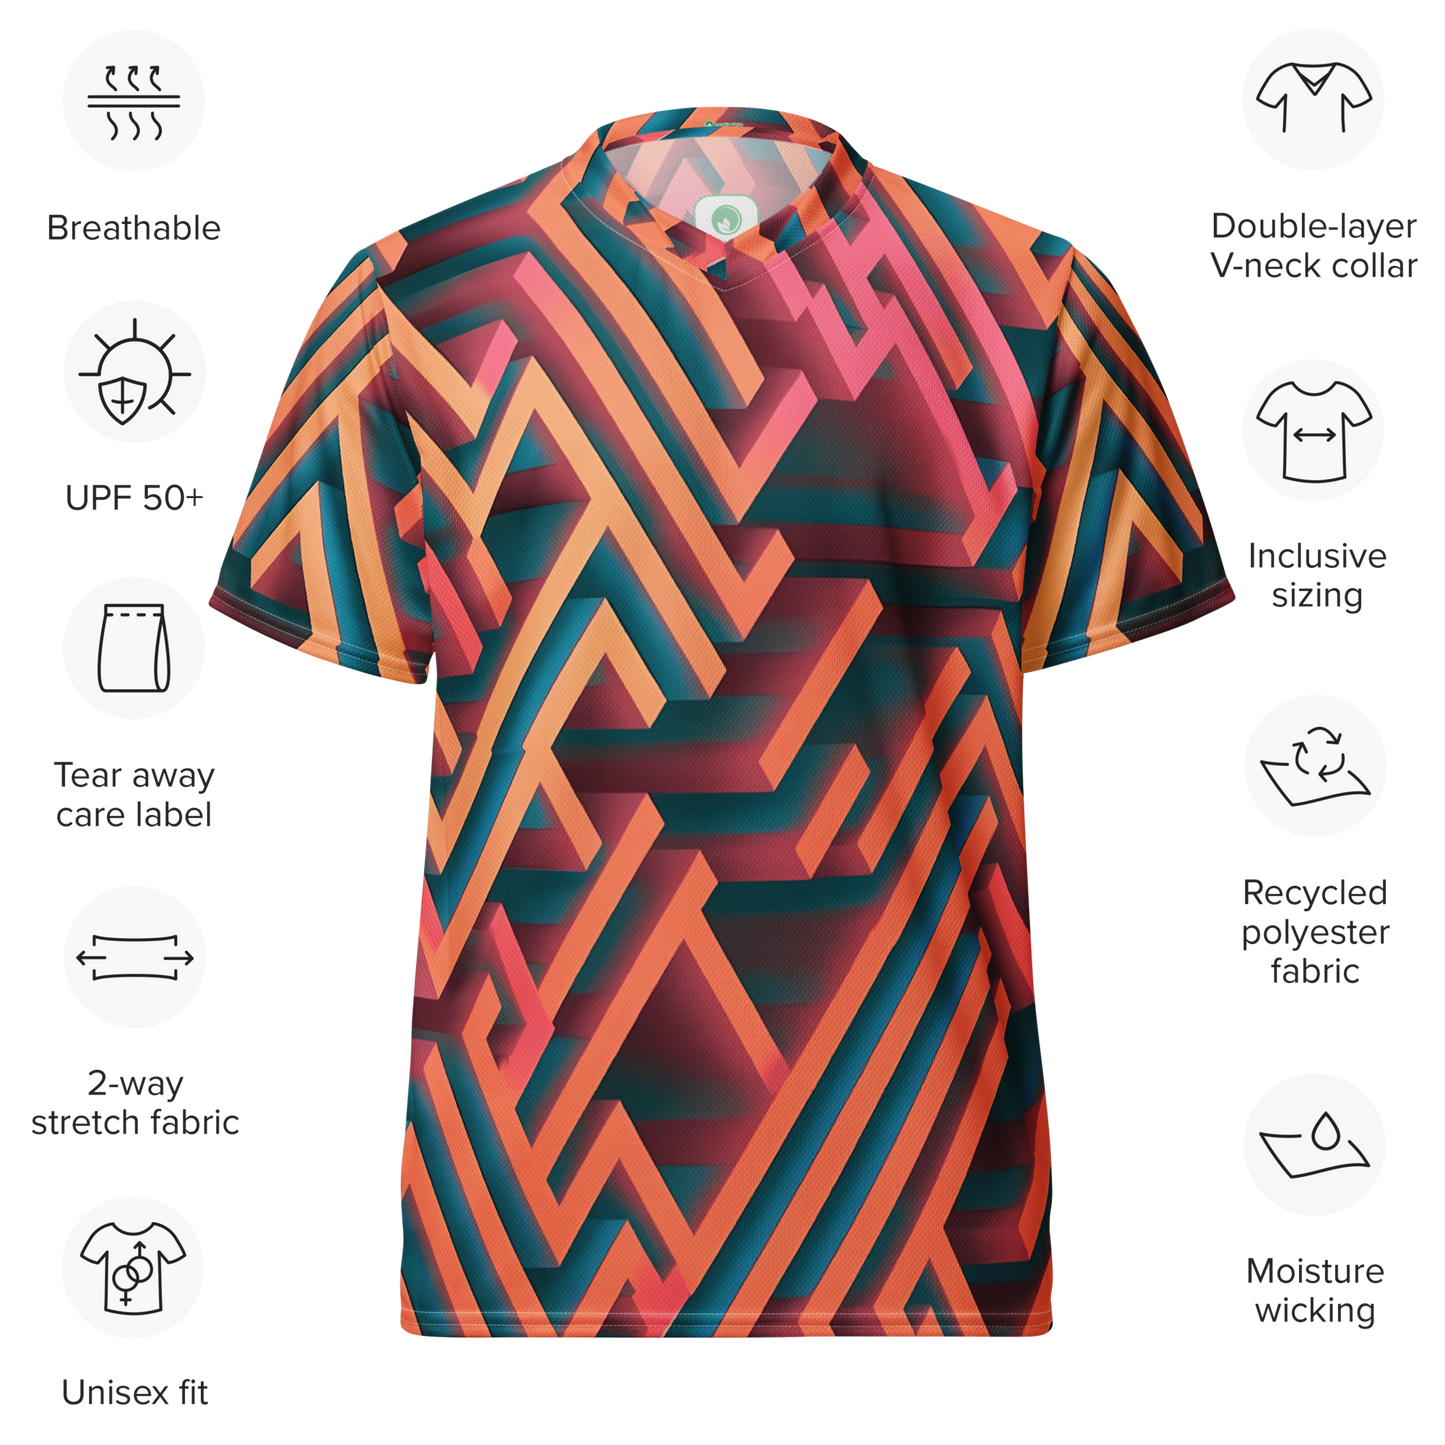 3D Maze Illusion | 3D Patterns | All-Over Print Recycled Unisex Sports Jersey - #1